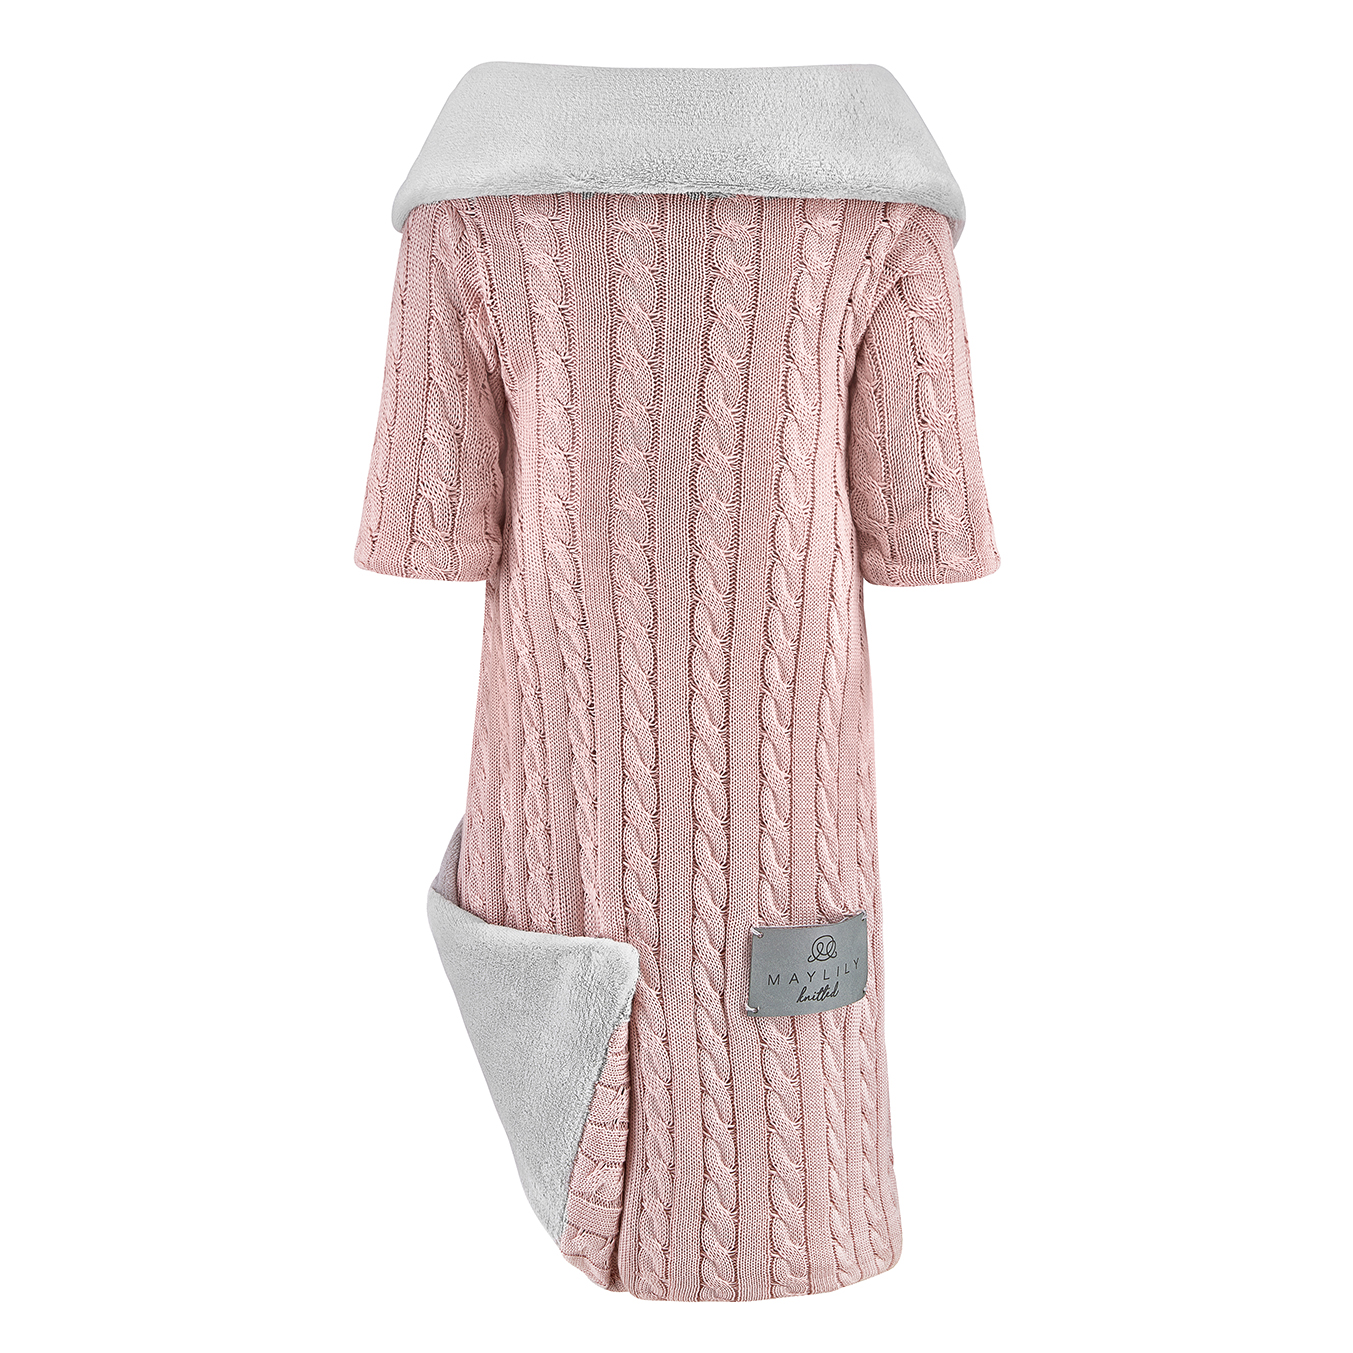 Bamboo sleeved blanket Winter - dusty pink